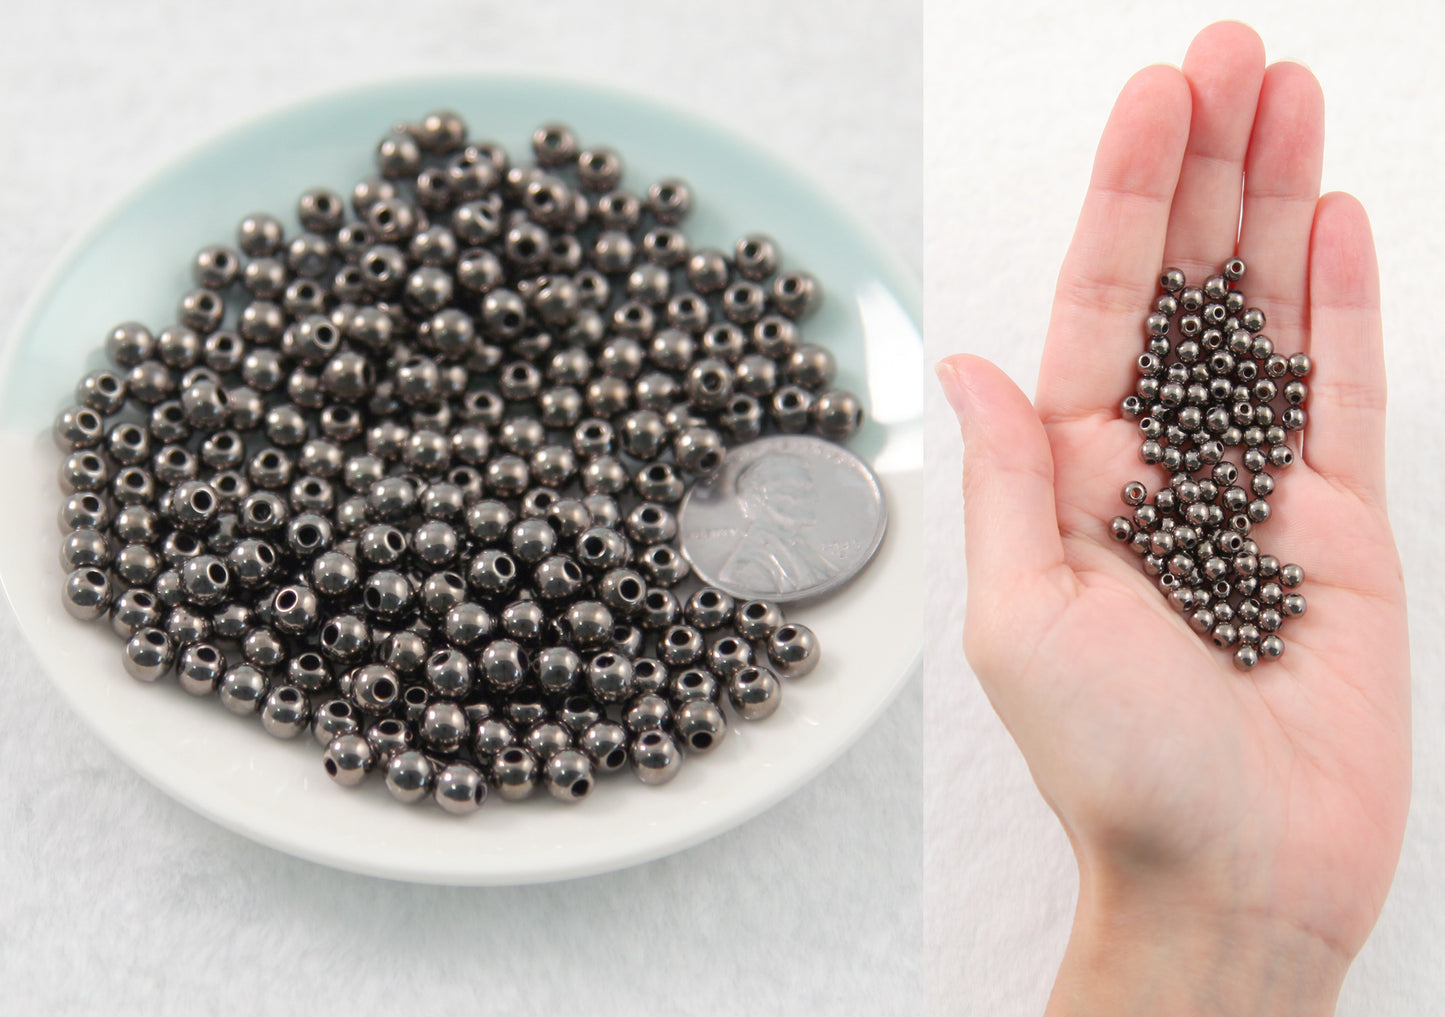 Spacer Beads - 300 pcs - 5mm Electroplated Gunmetal Dark Silver Plastic Spacer Beads - Super Lightweight - Easy to use in jewelry